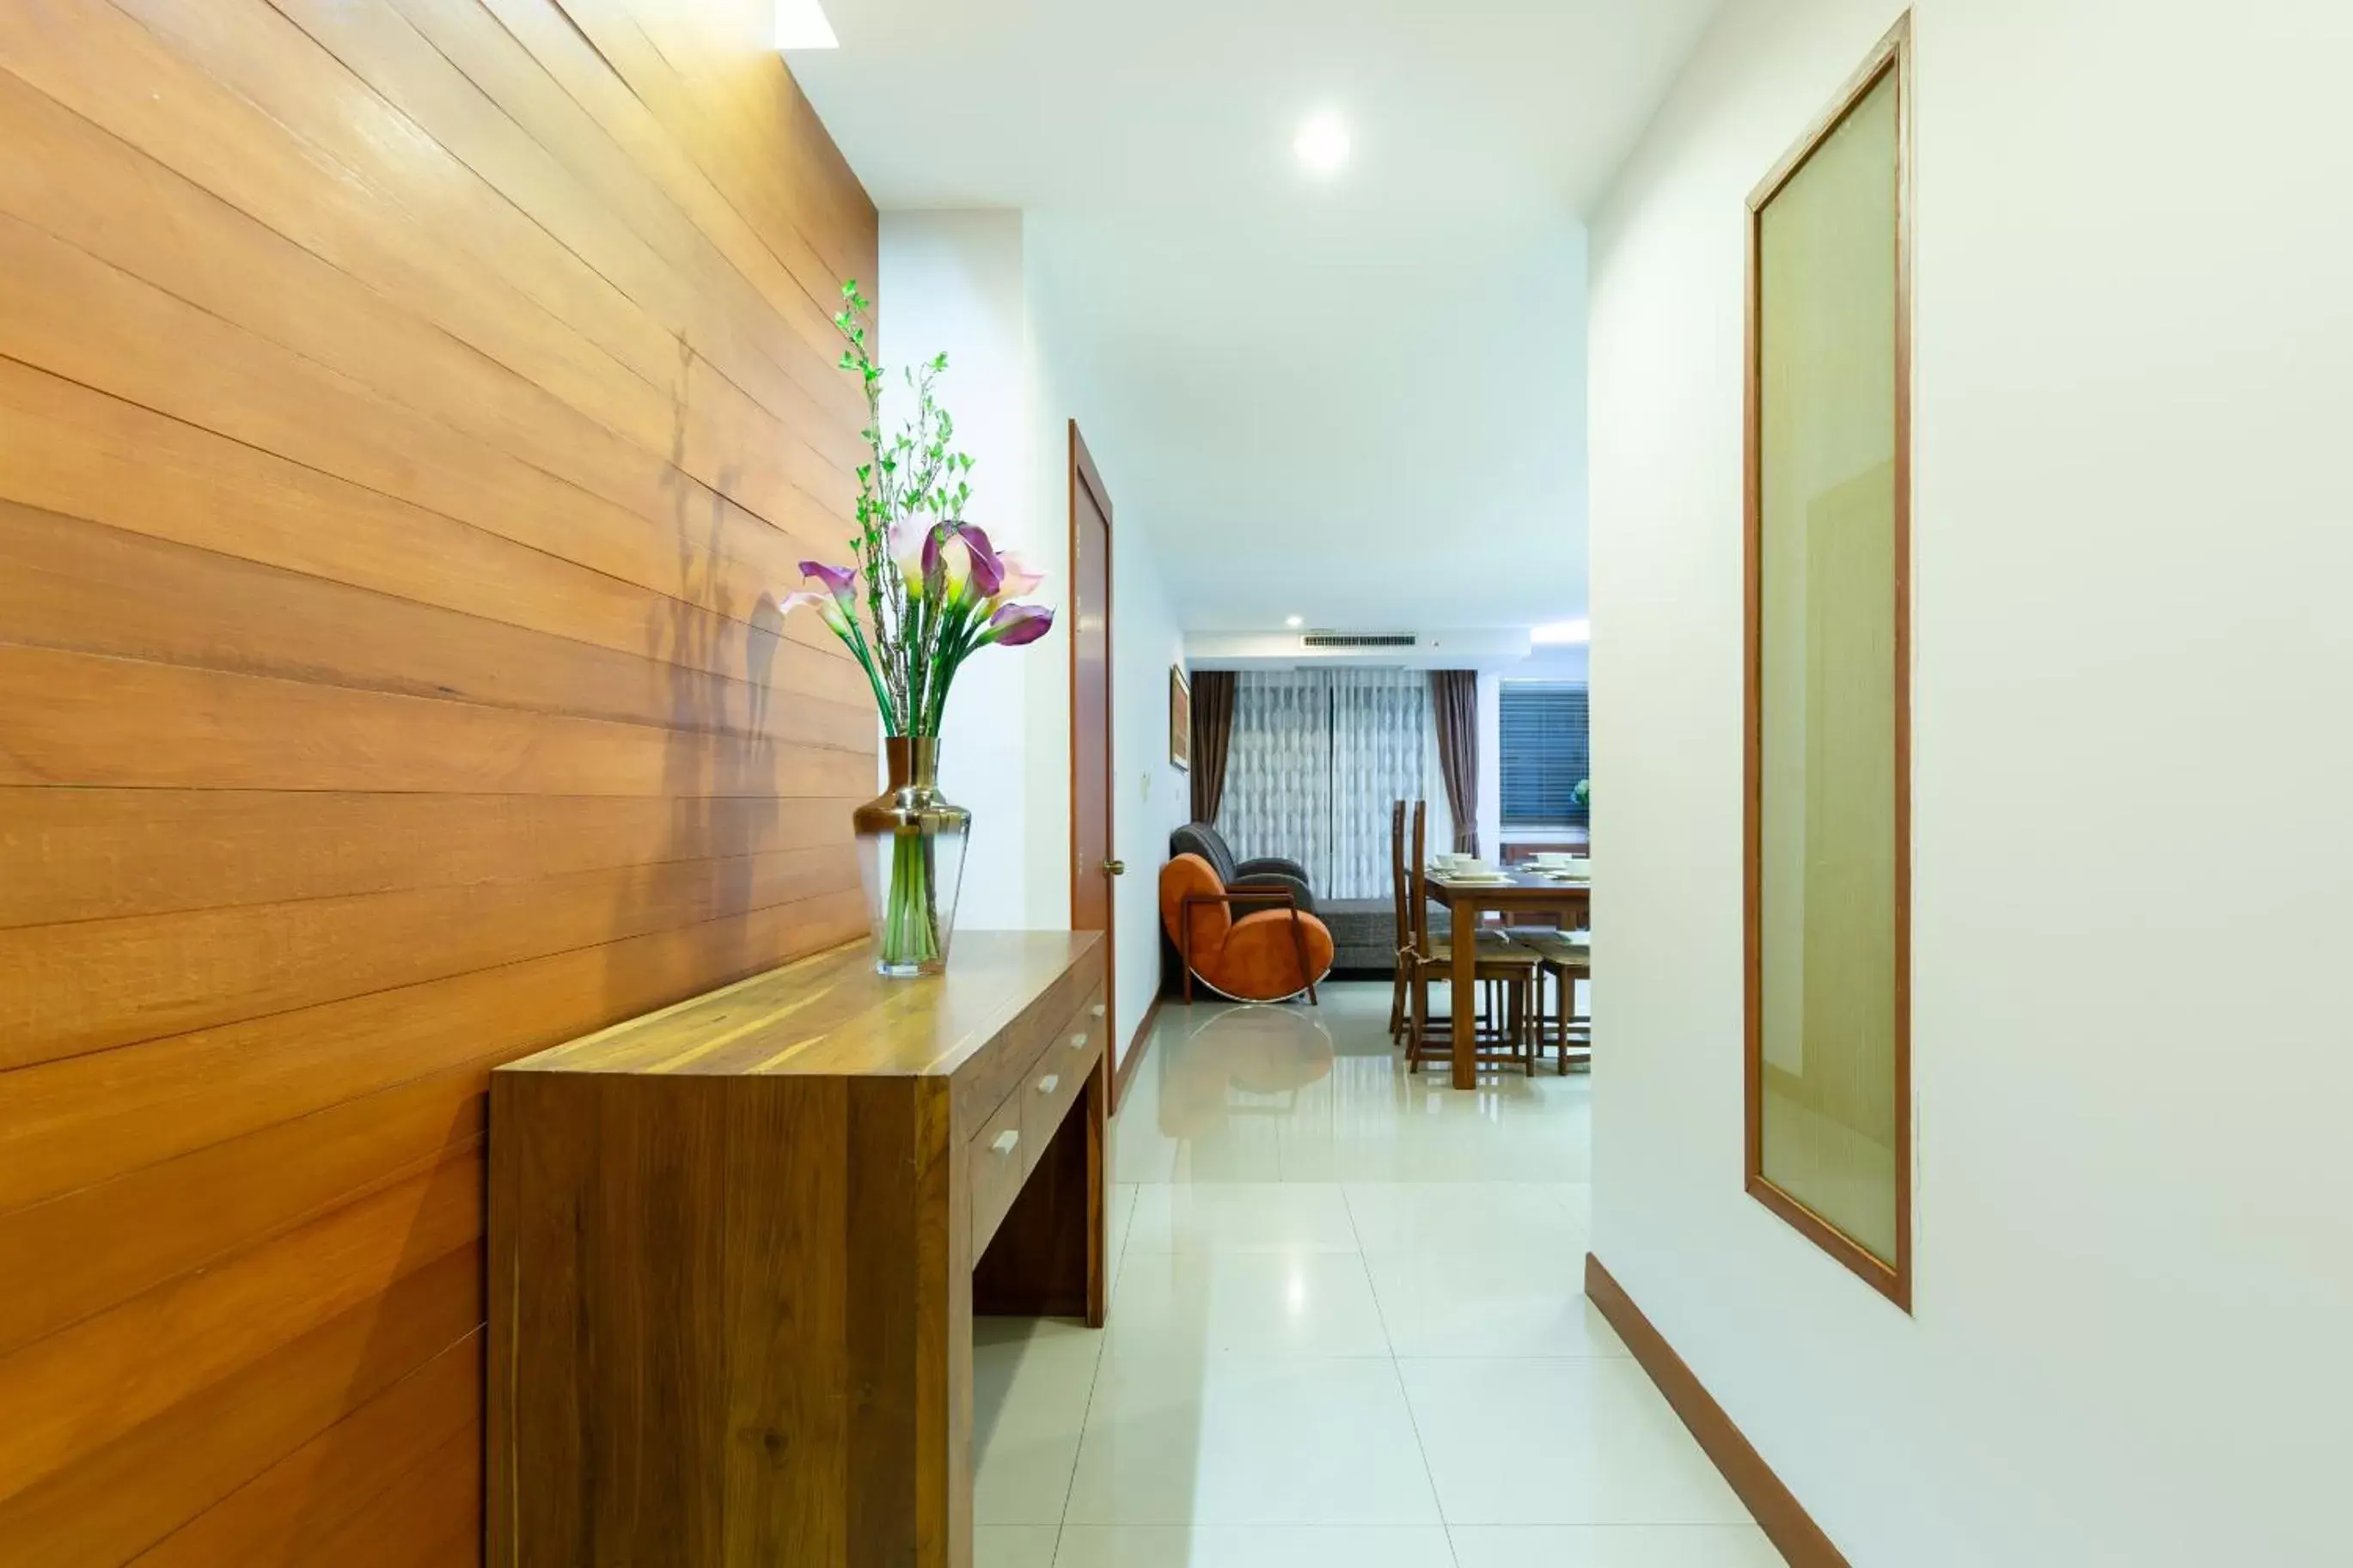 Area and facilities in Lasalle Suites Hotel & Residence